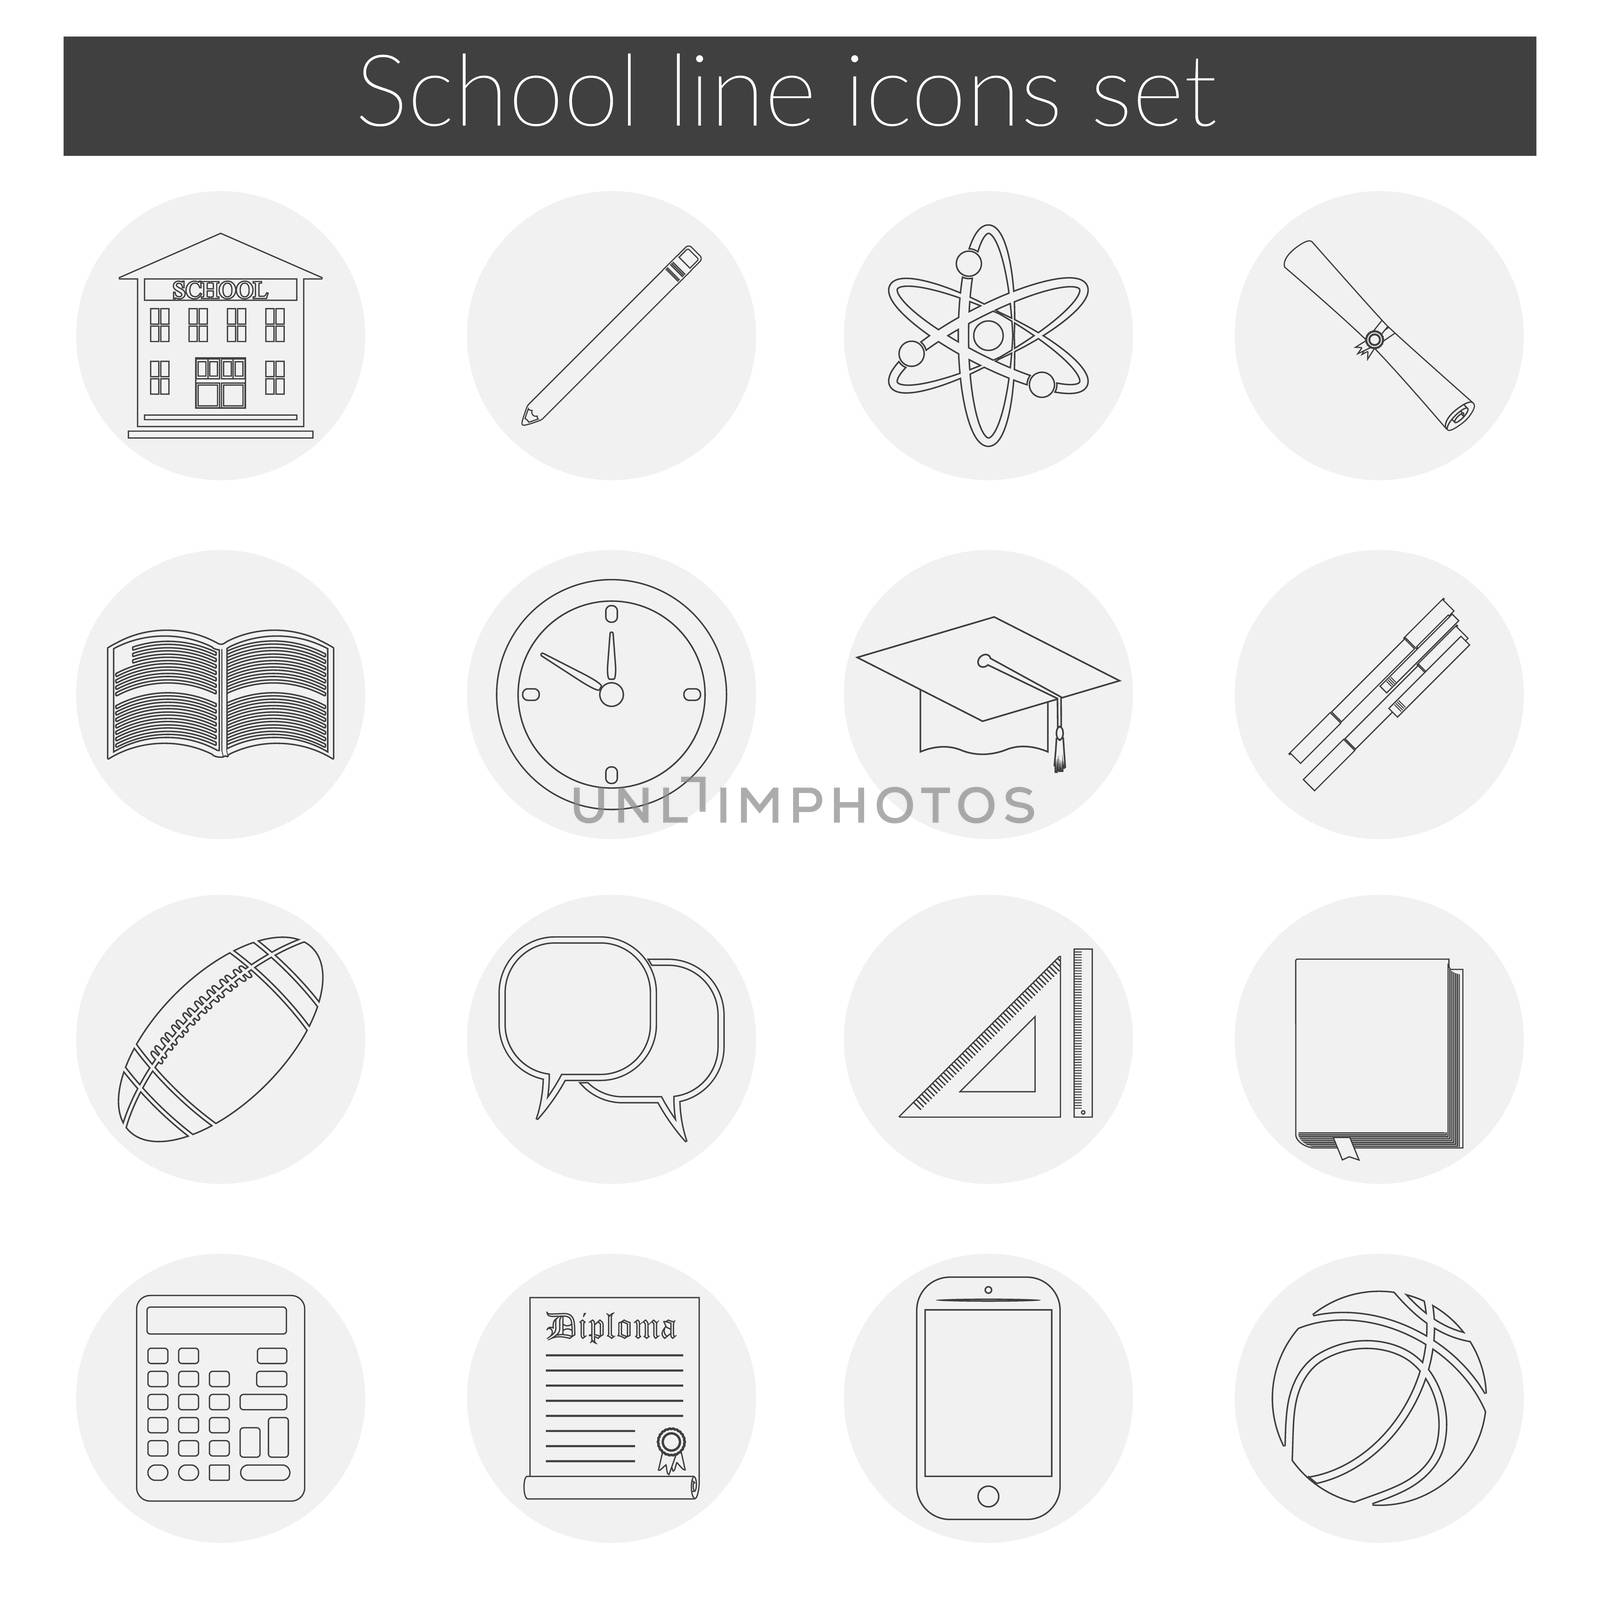 Back to School icon vector set, school building, pen, pensil, sport items, diploma and graduation cap icons, isolated silhouets